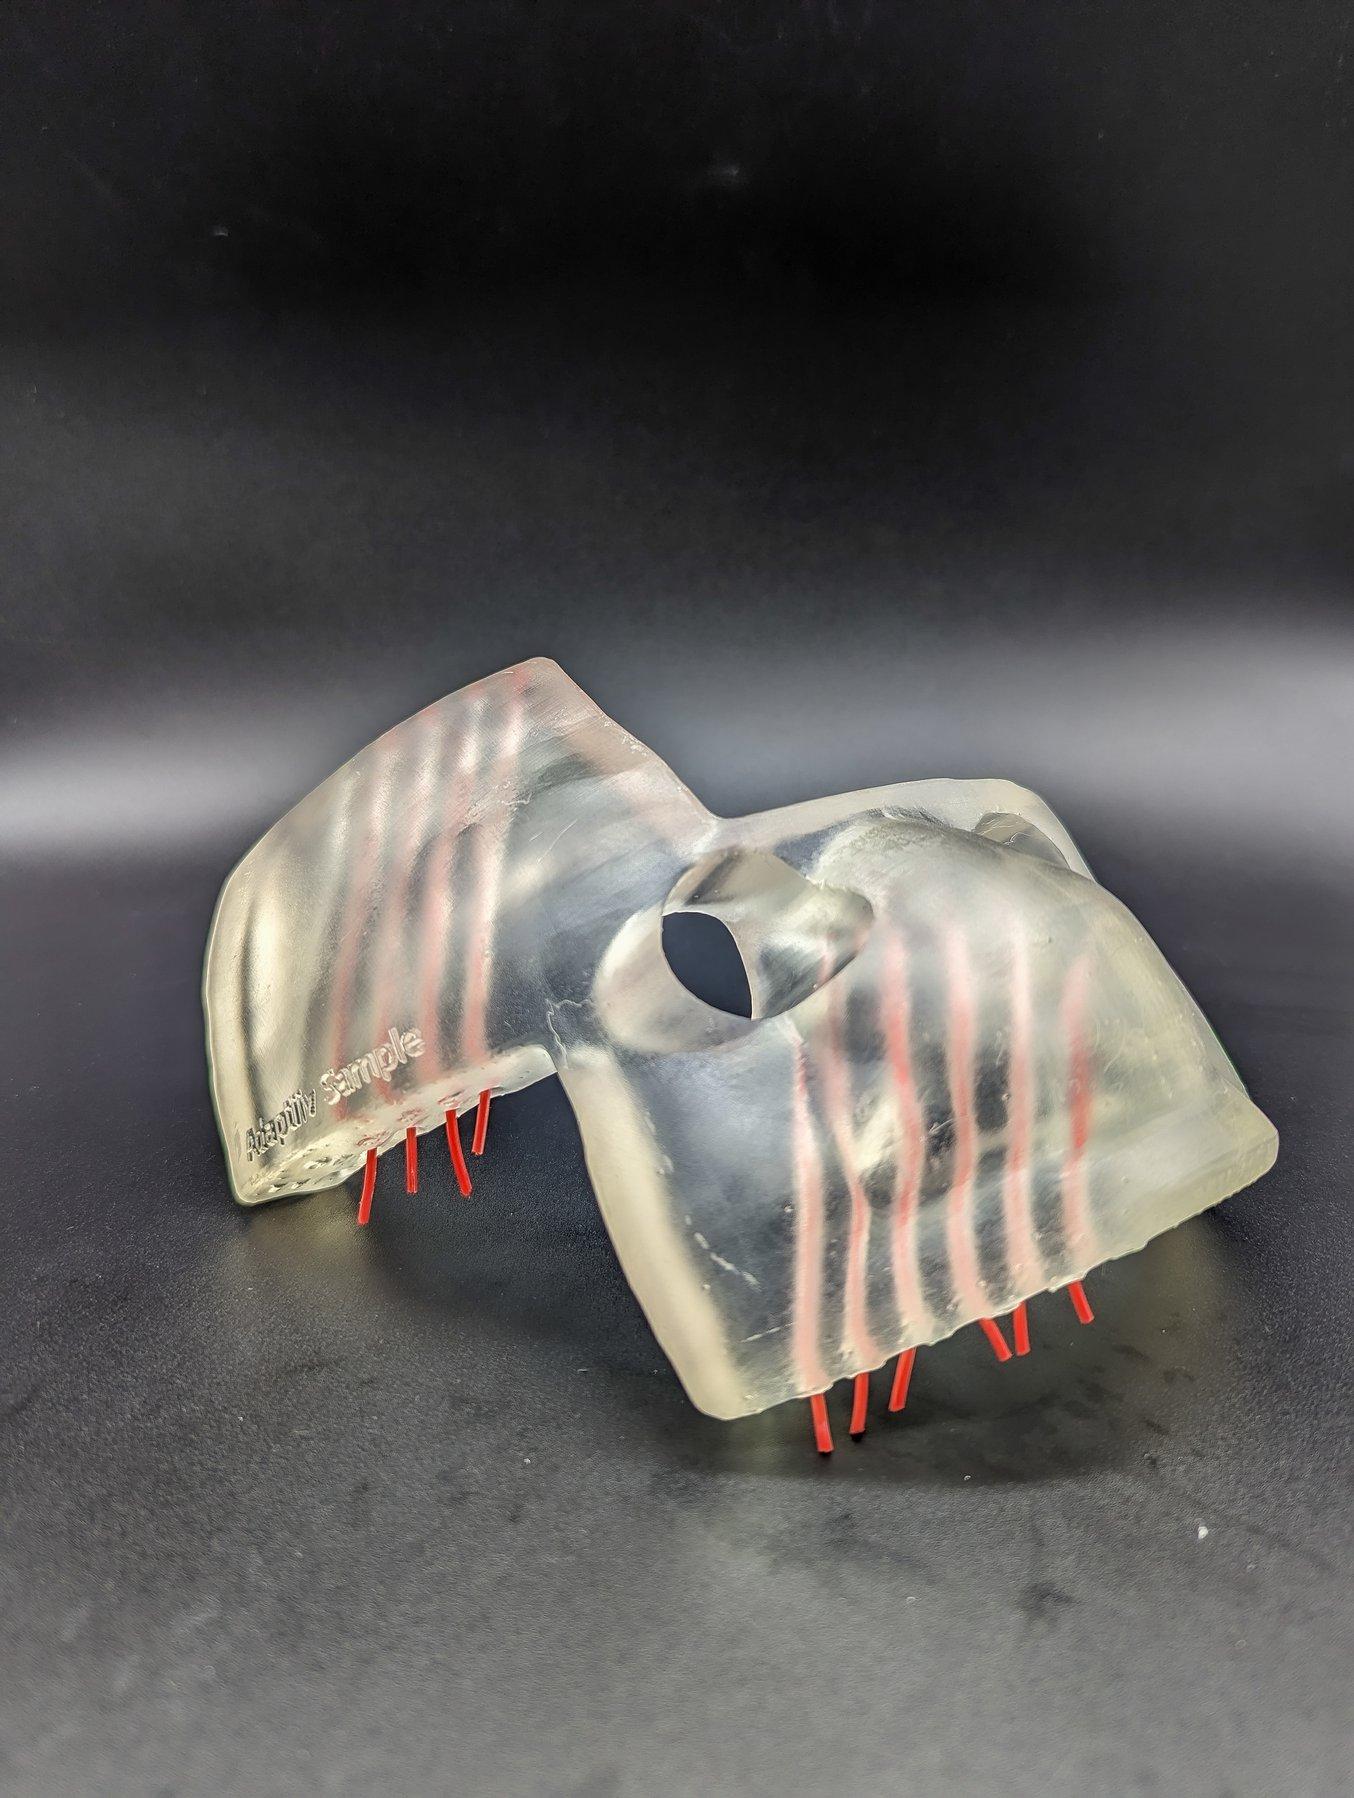 Clear 3D printed brachytherapy device